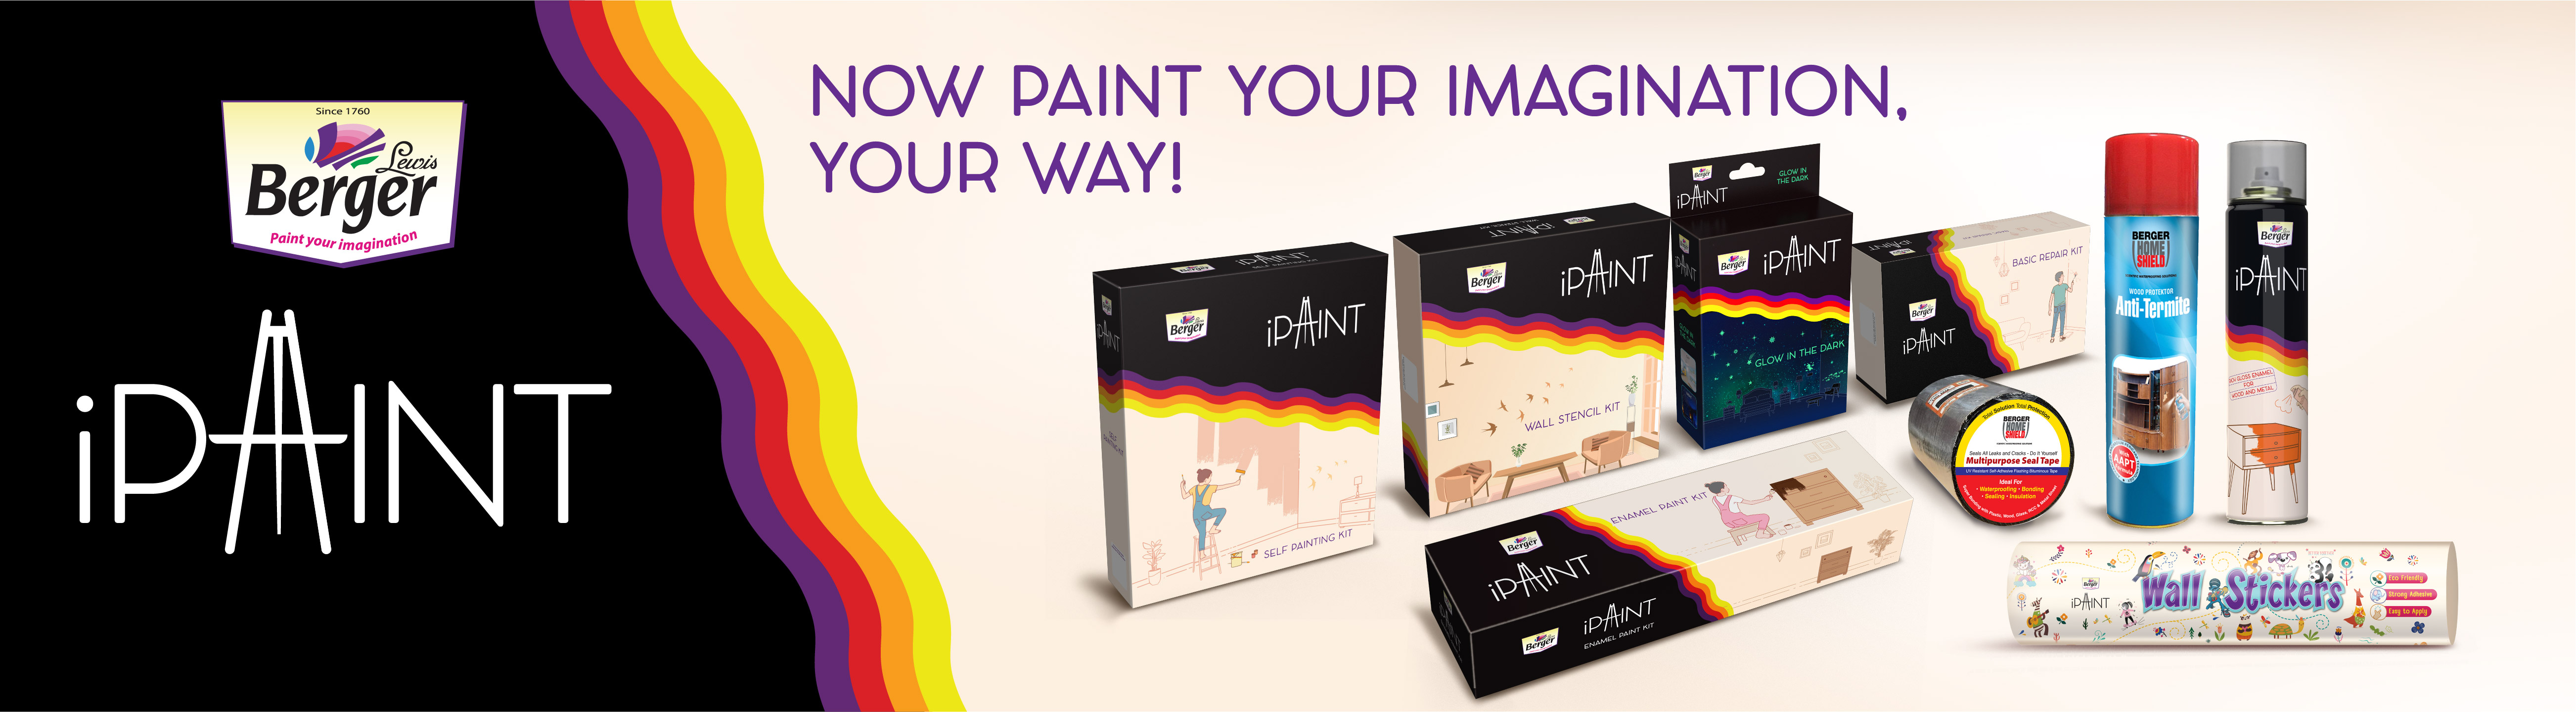 iPaint Self Painting Kit Banner